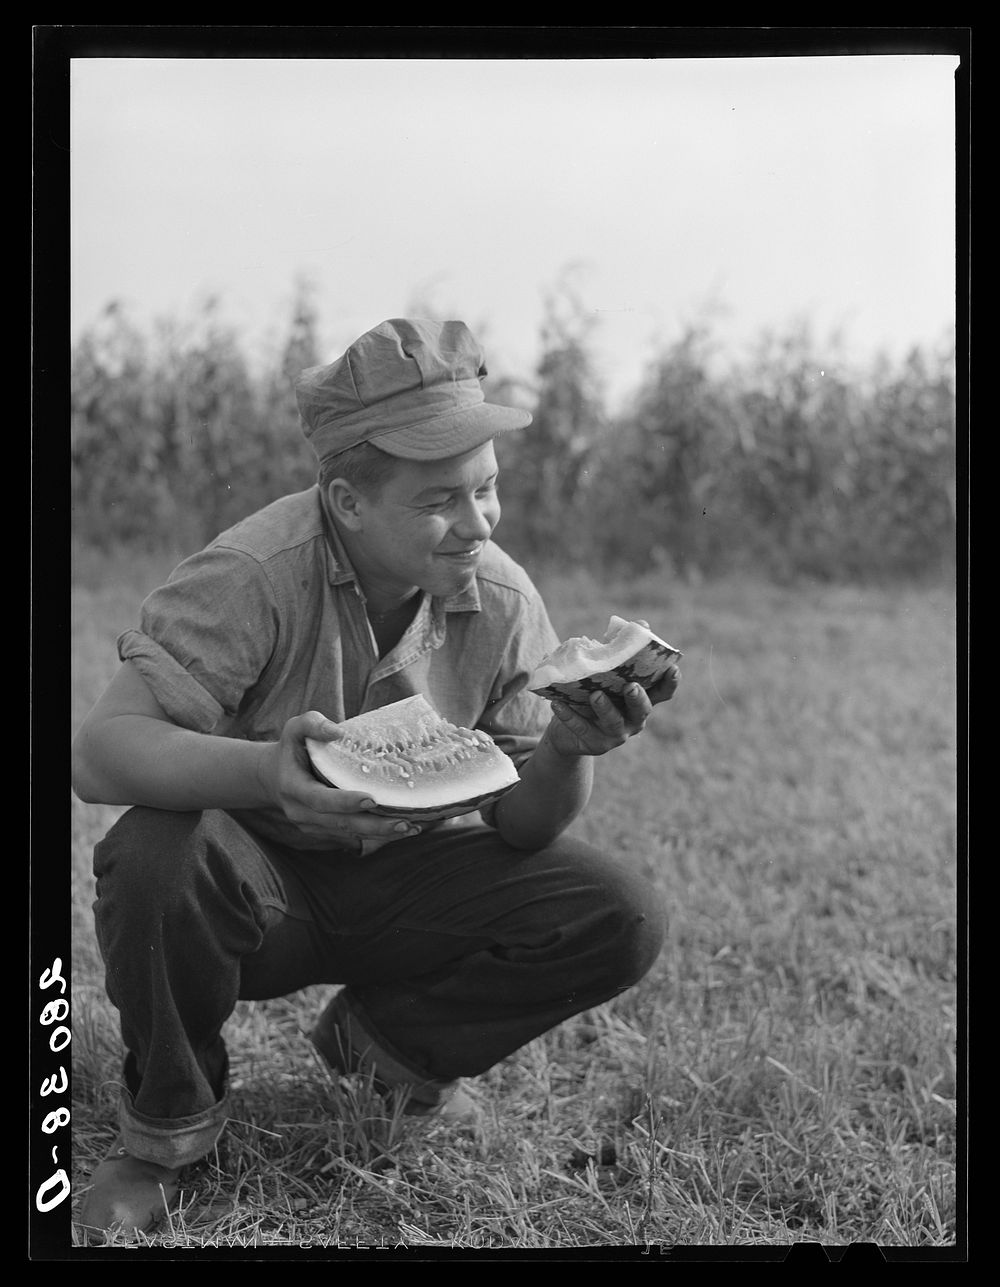 Bud Kimberley eating watermelon. Jasper County, Iowa. Sourced from the Library of Congress.